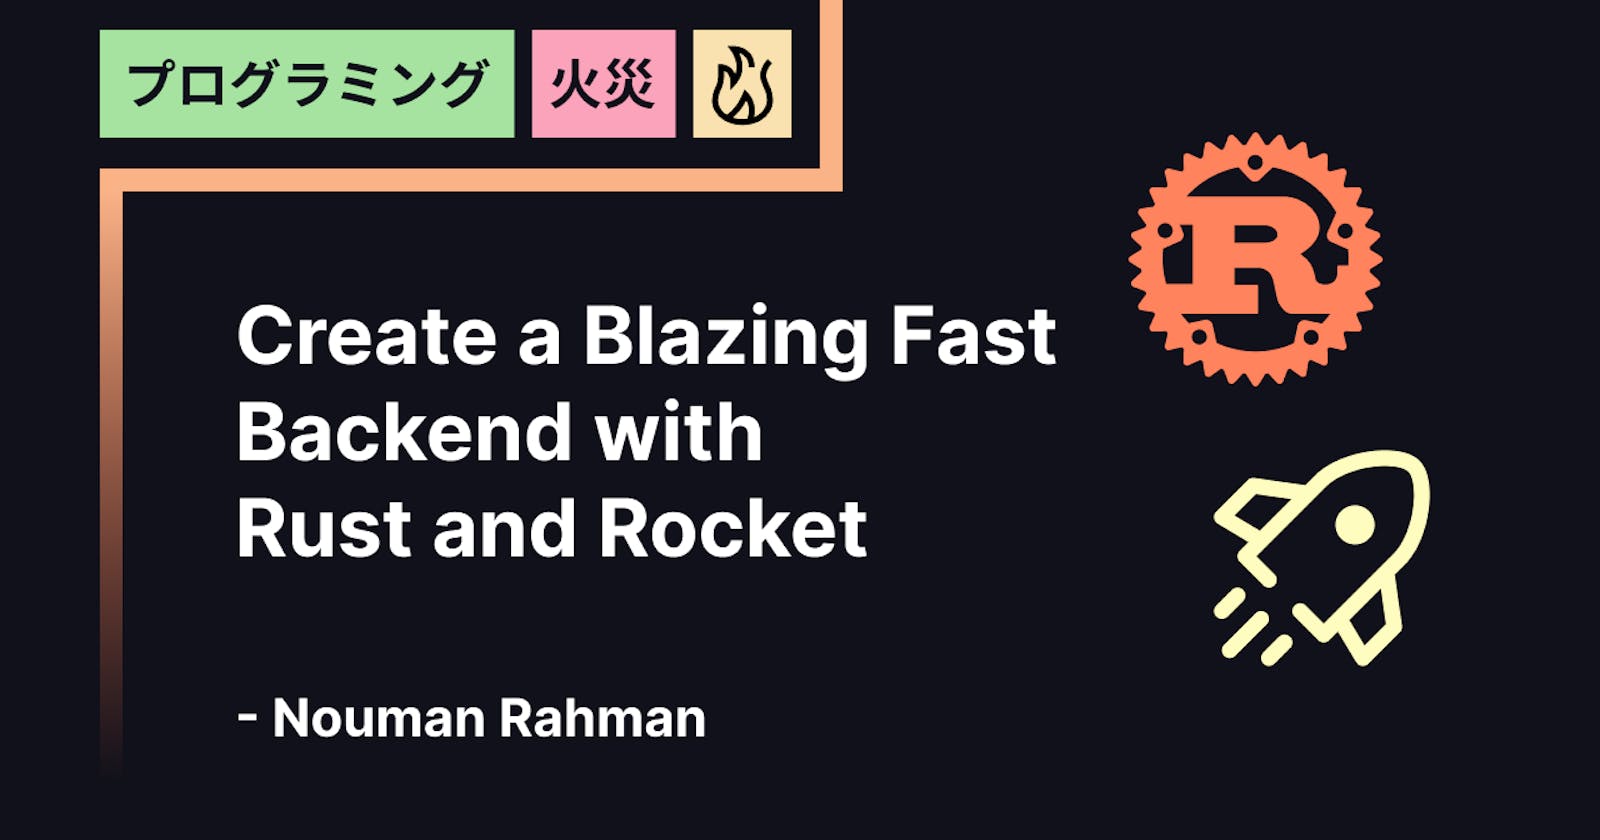 Create a Blazing Fast Backend with Rust and Rocket